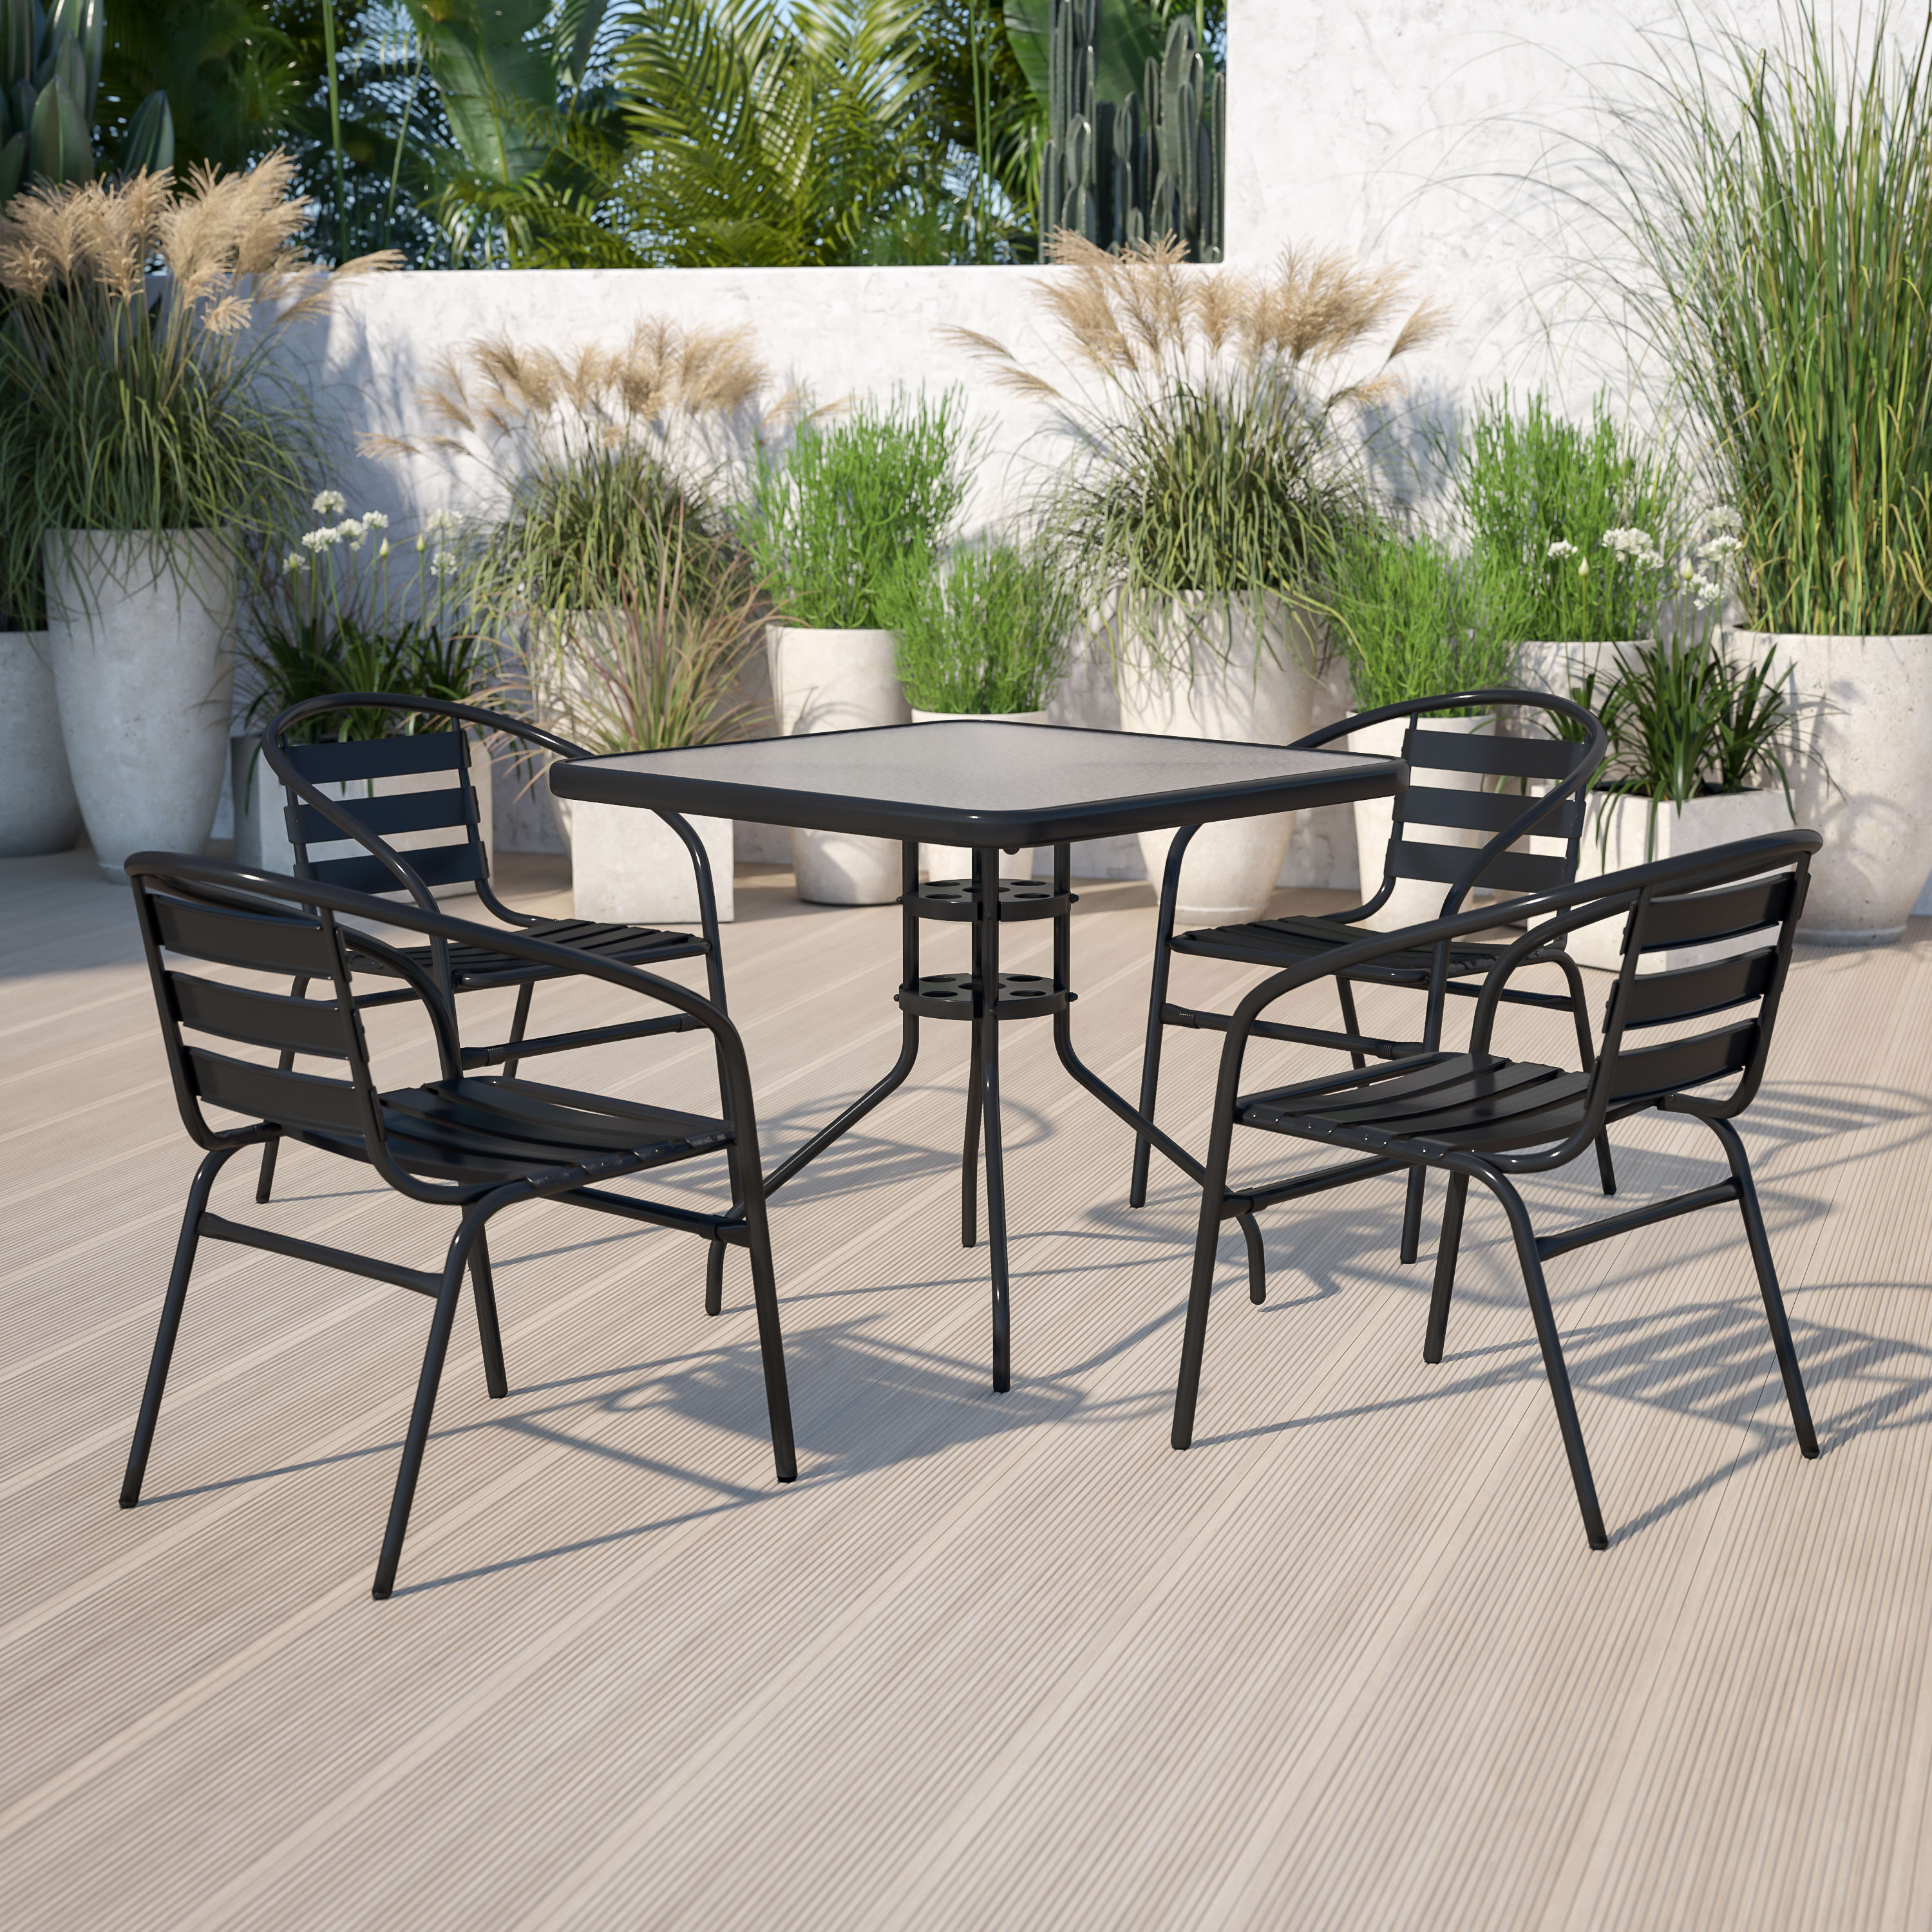 Flash Furniture 31.5'' Square Glass Metal Table with 4 Black Metal Aluminum Slat Stack Chairs - image 1 of 13